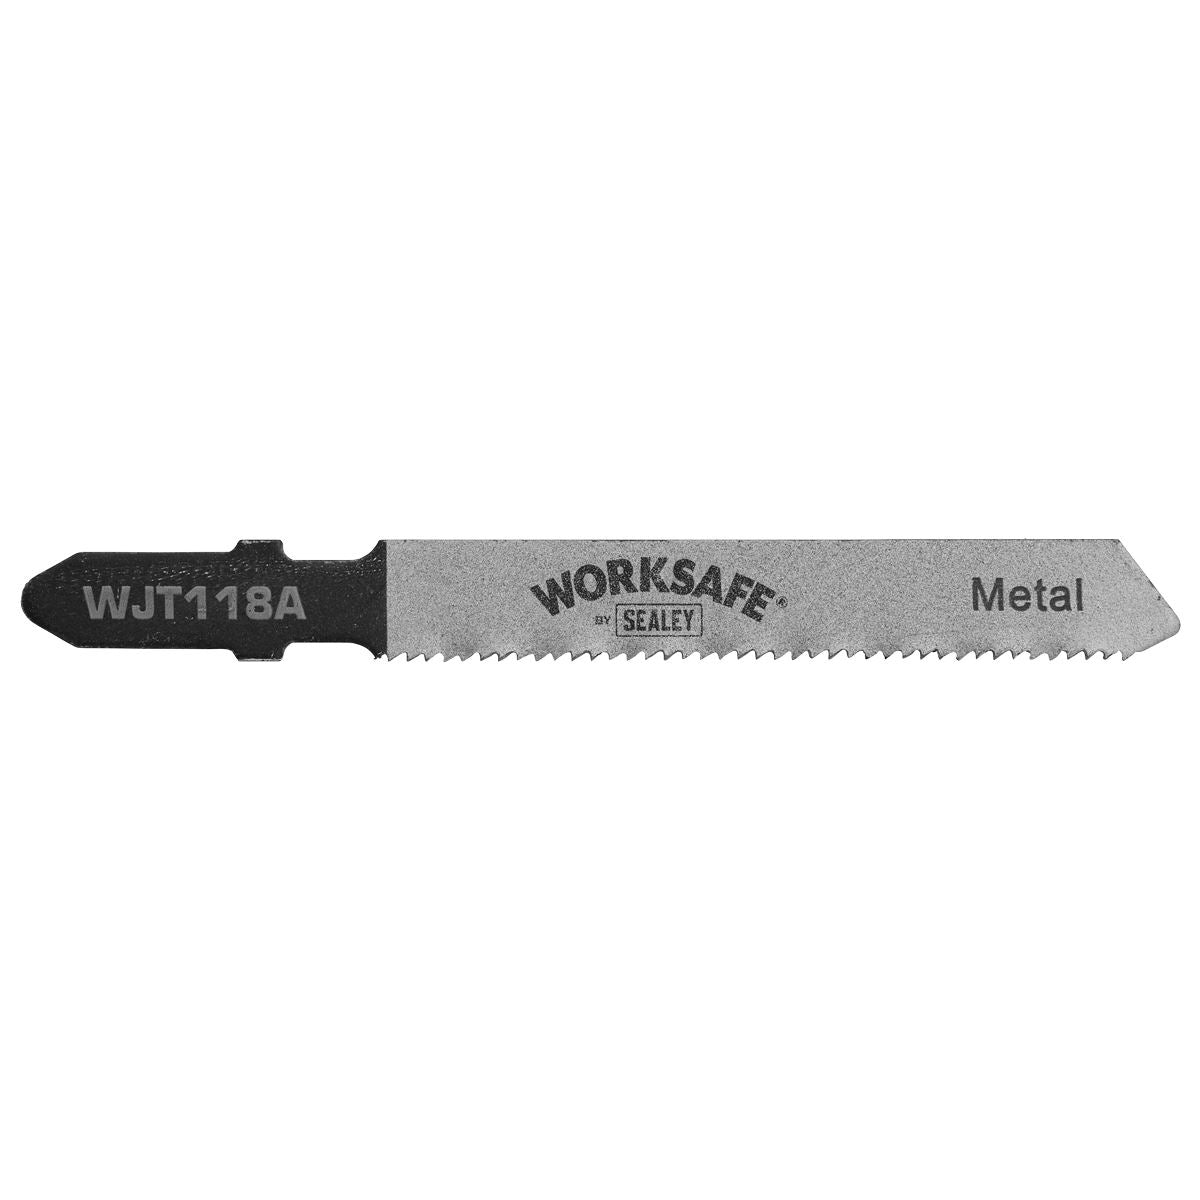 Sealey Jigsaw Blade Metal 55mm 21tpi - Pack of 5